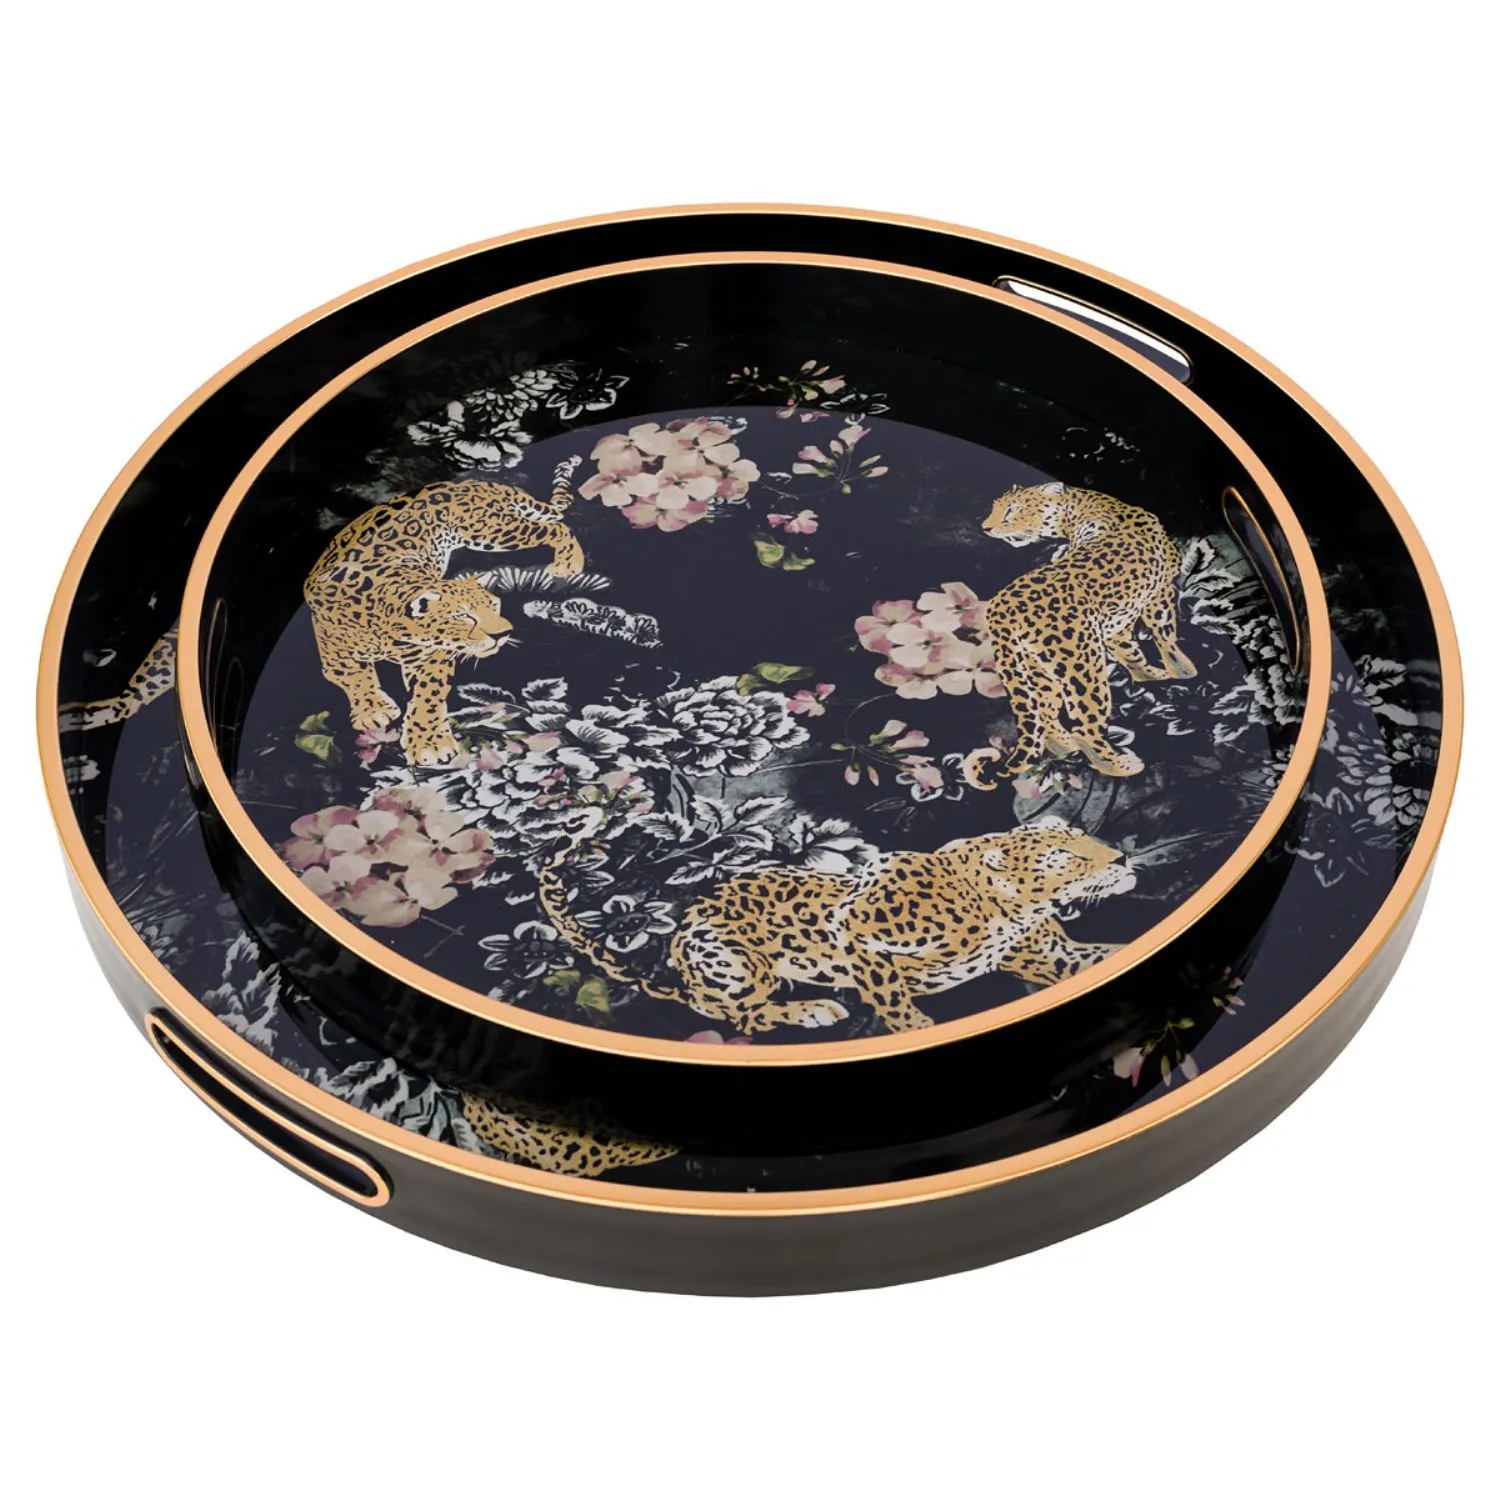 Circular Tray Set With Leopard Design